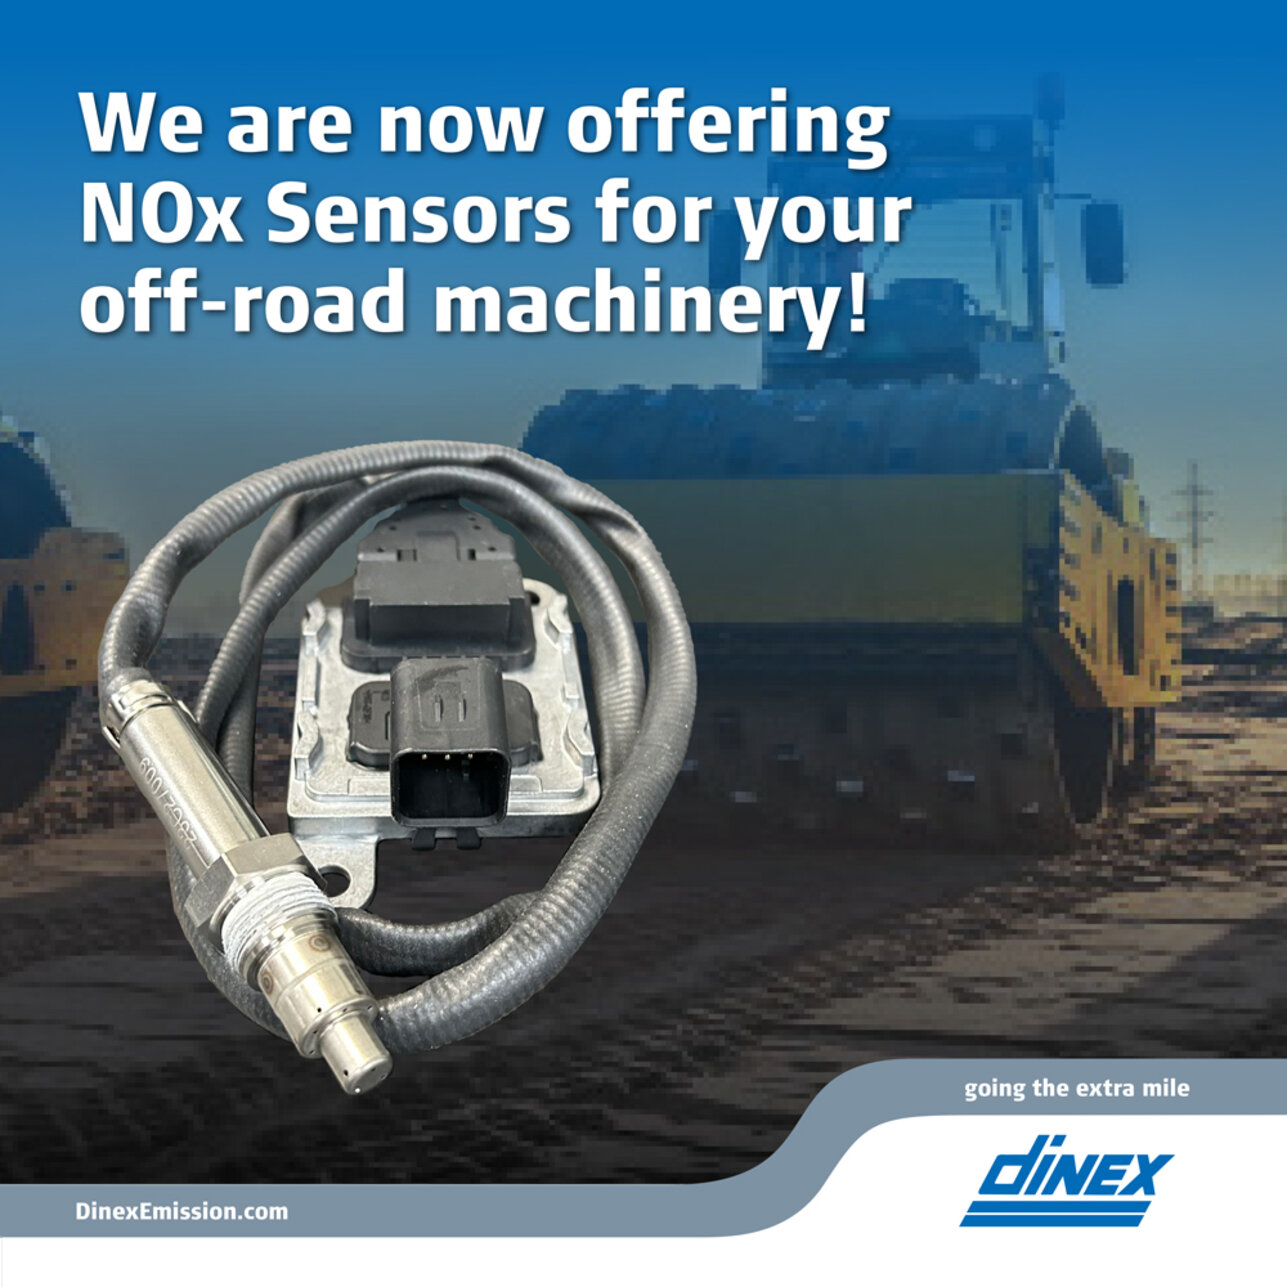 Dinex offering NOx sensors for your off-road machinery